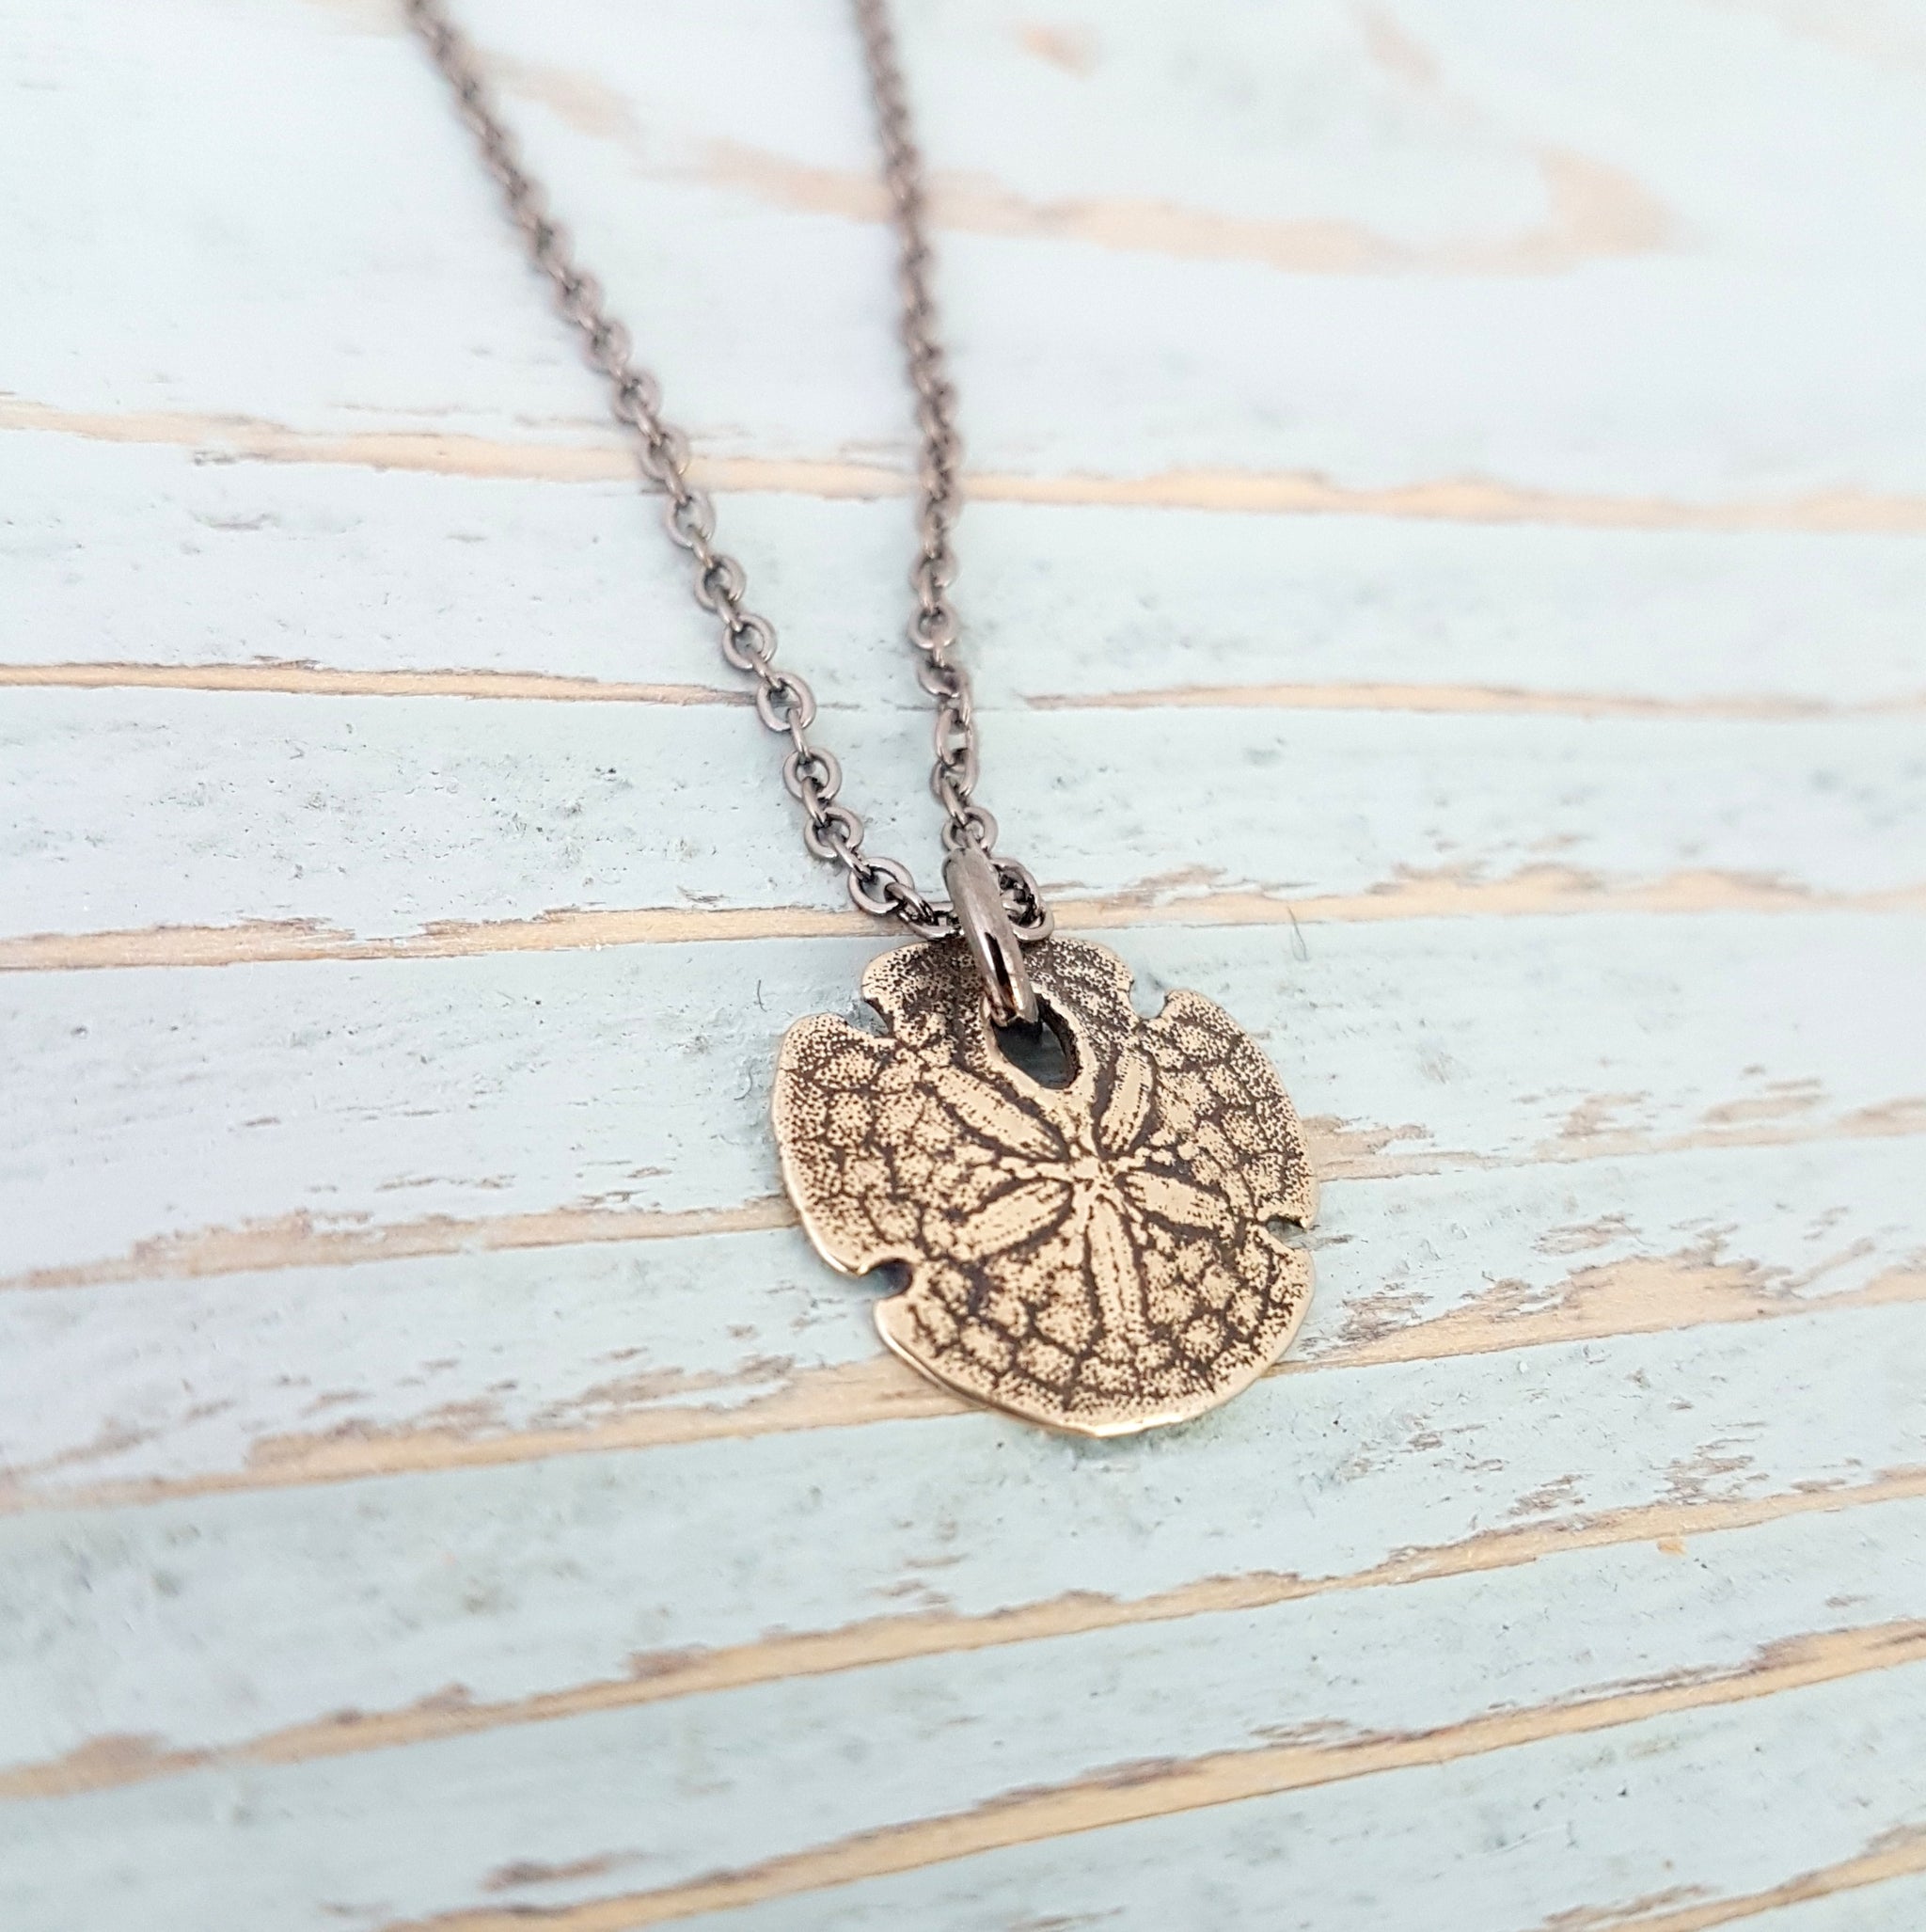 Sand Dollar Necklace - Gwen Delicious Jewelry Designs